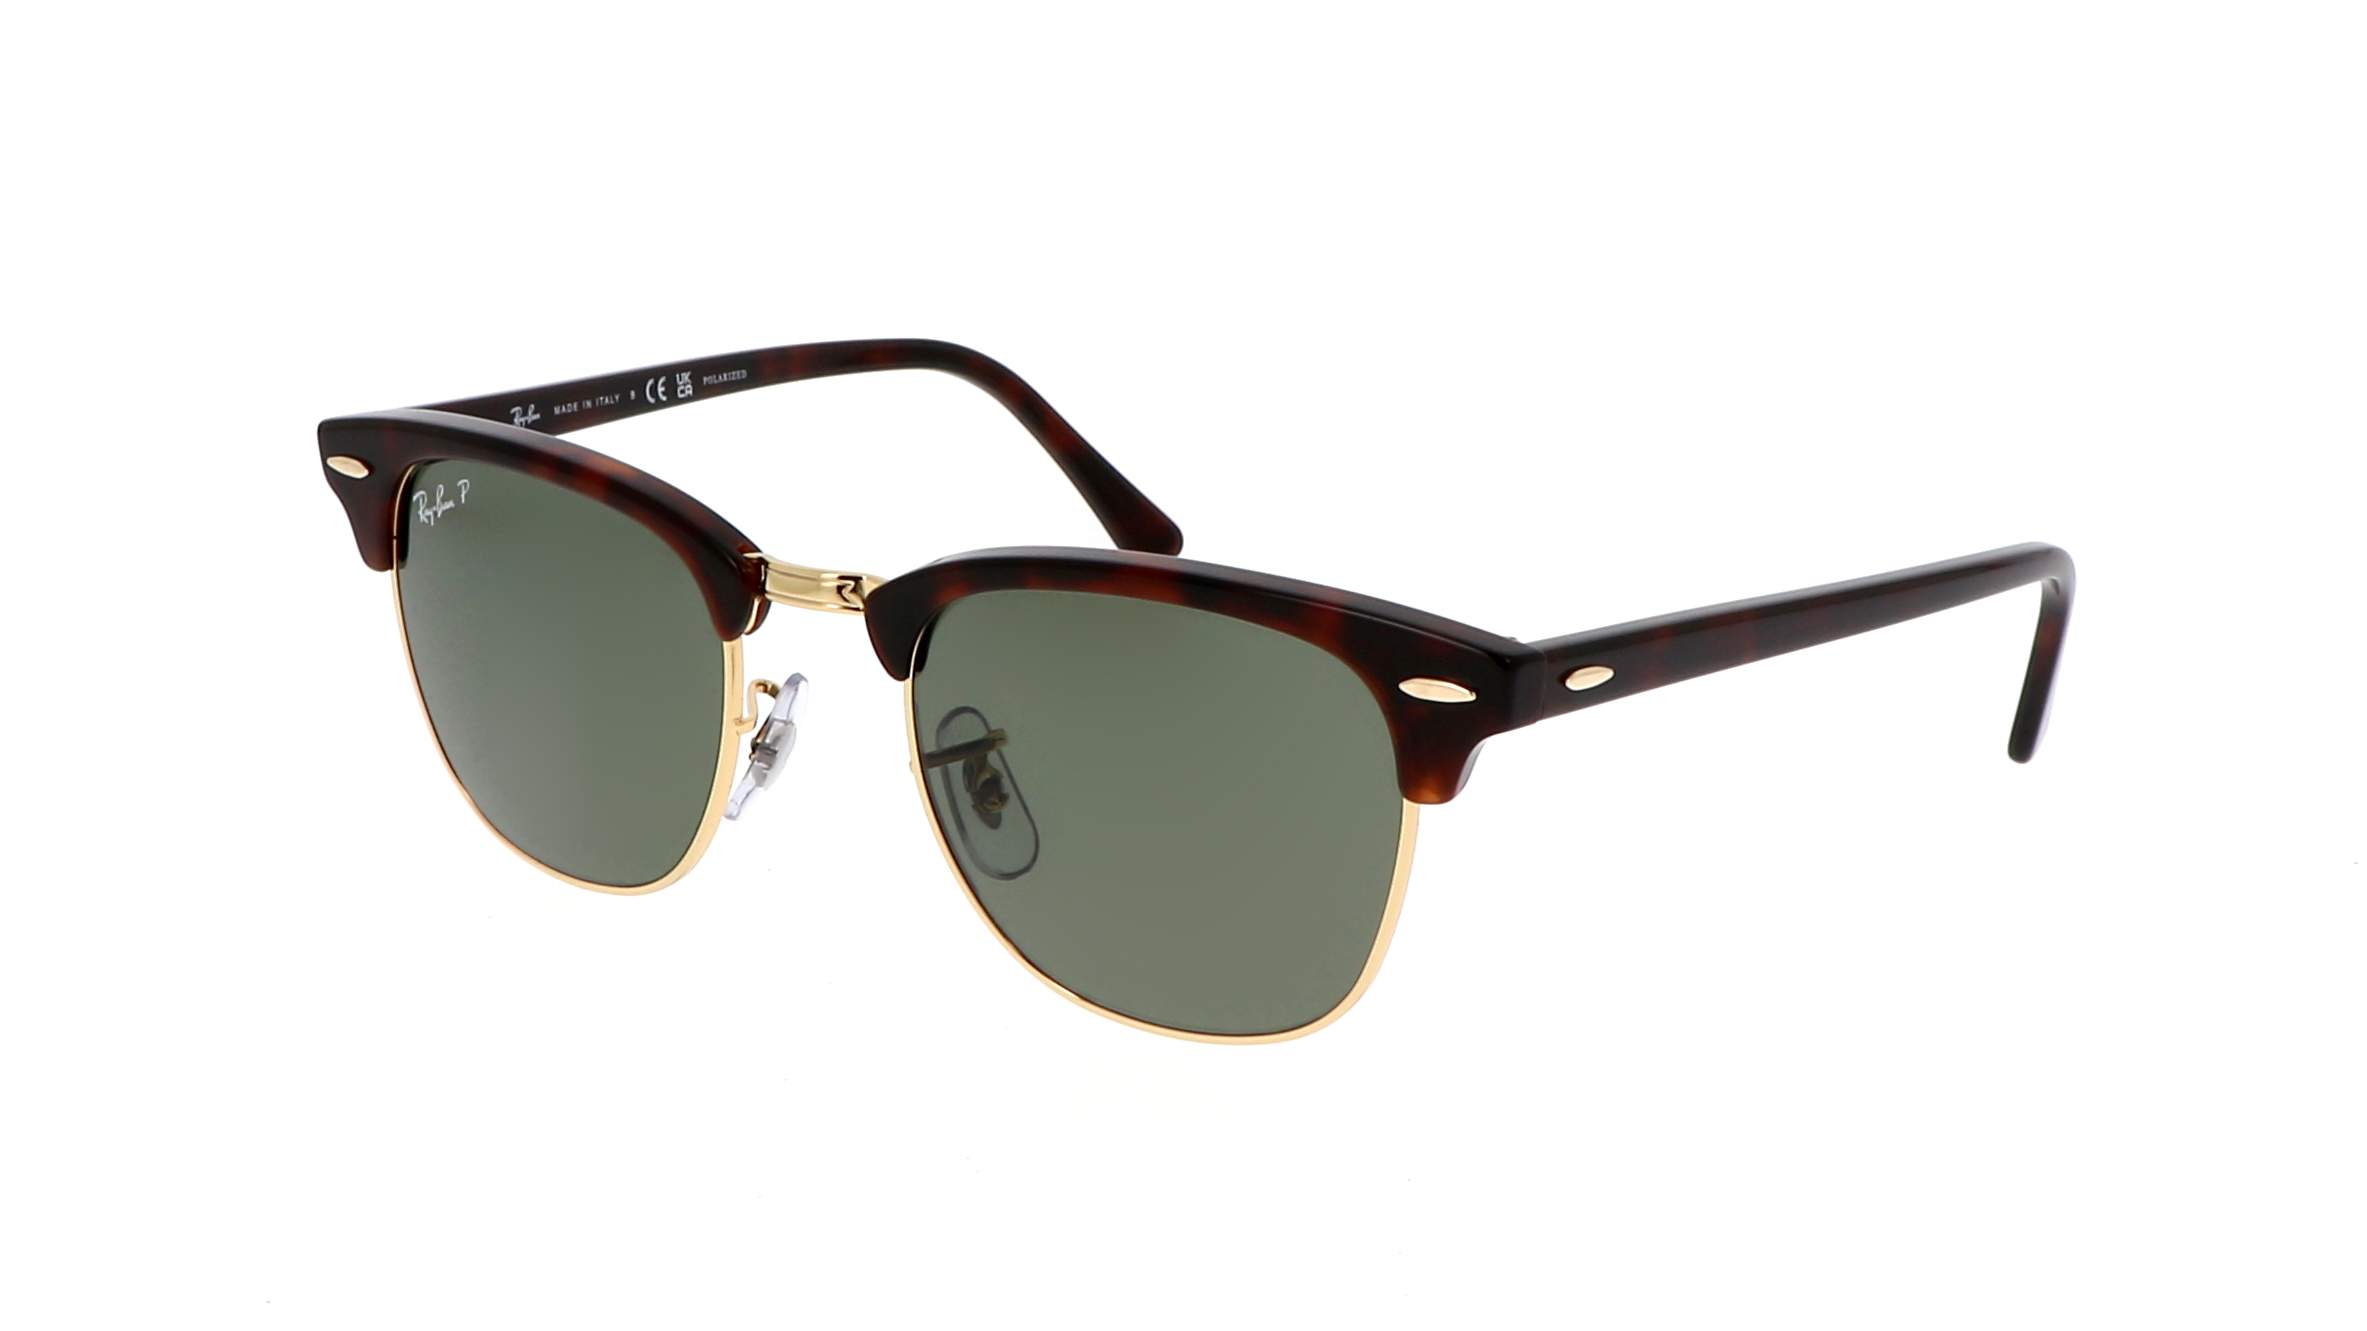 Sunglasses Ray-Ban Clubmaster Brown RB3016 990/58 51-21 Polarized in ...